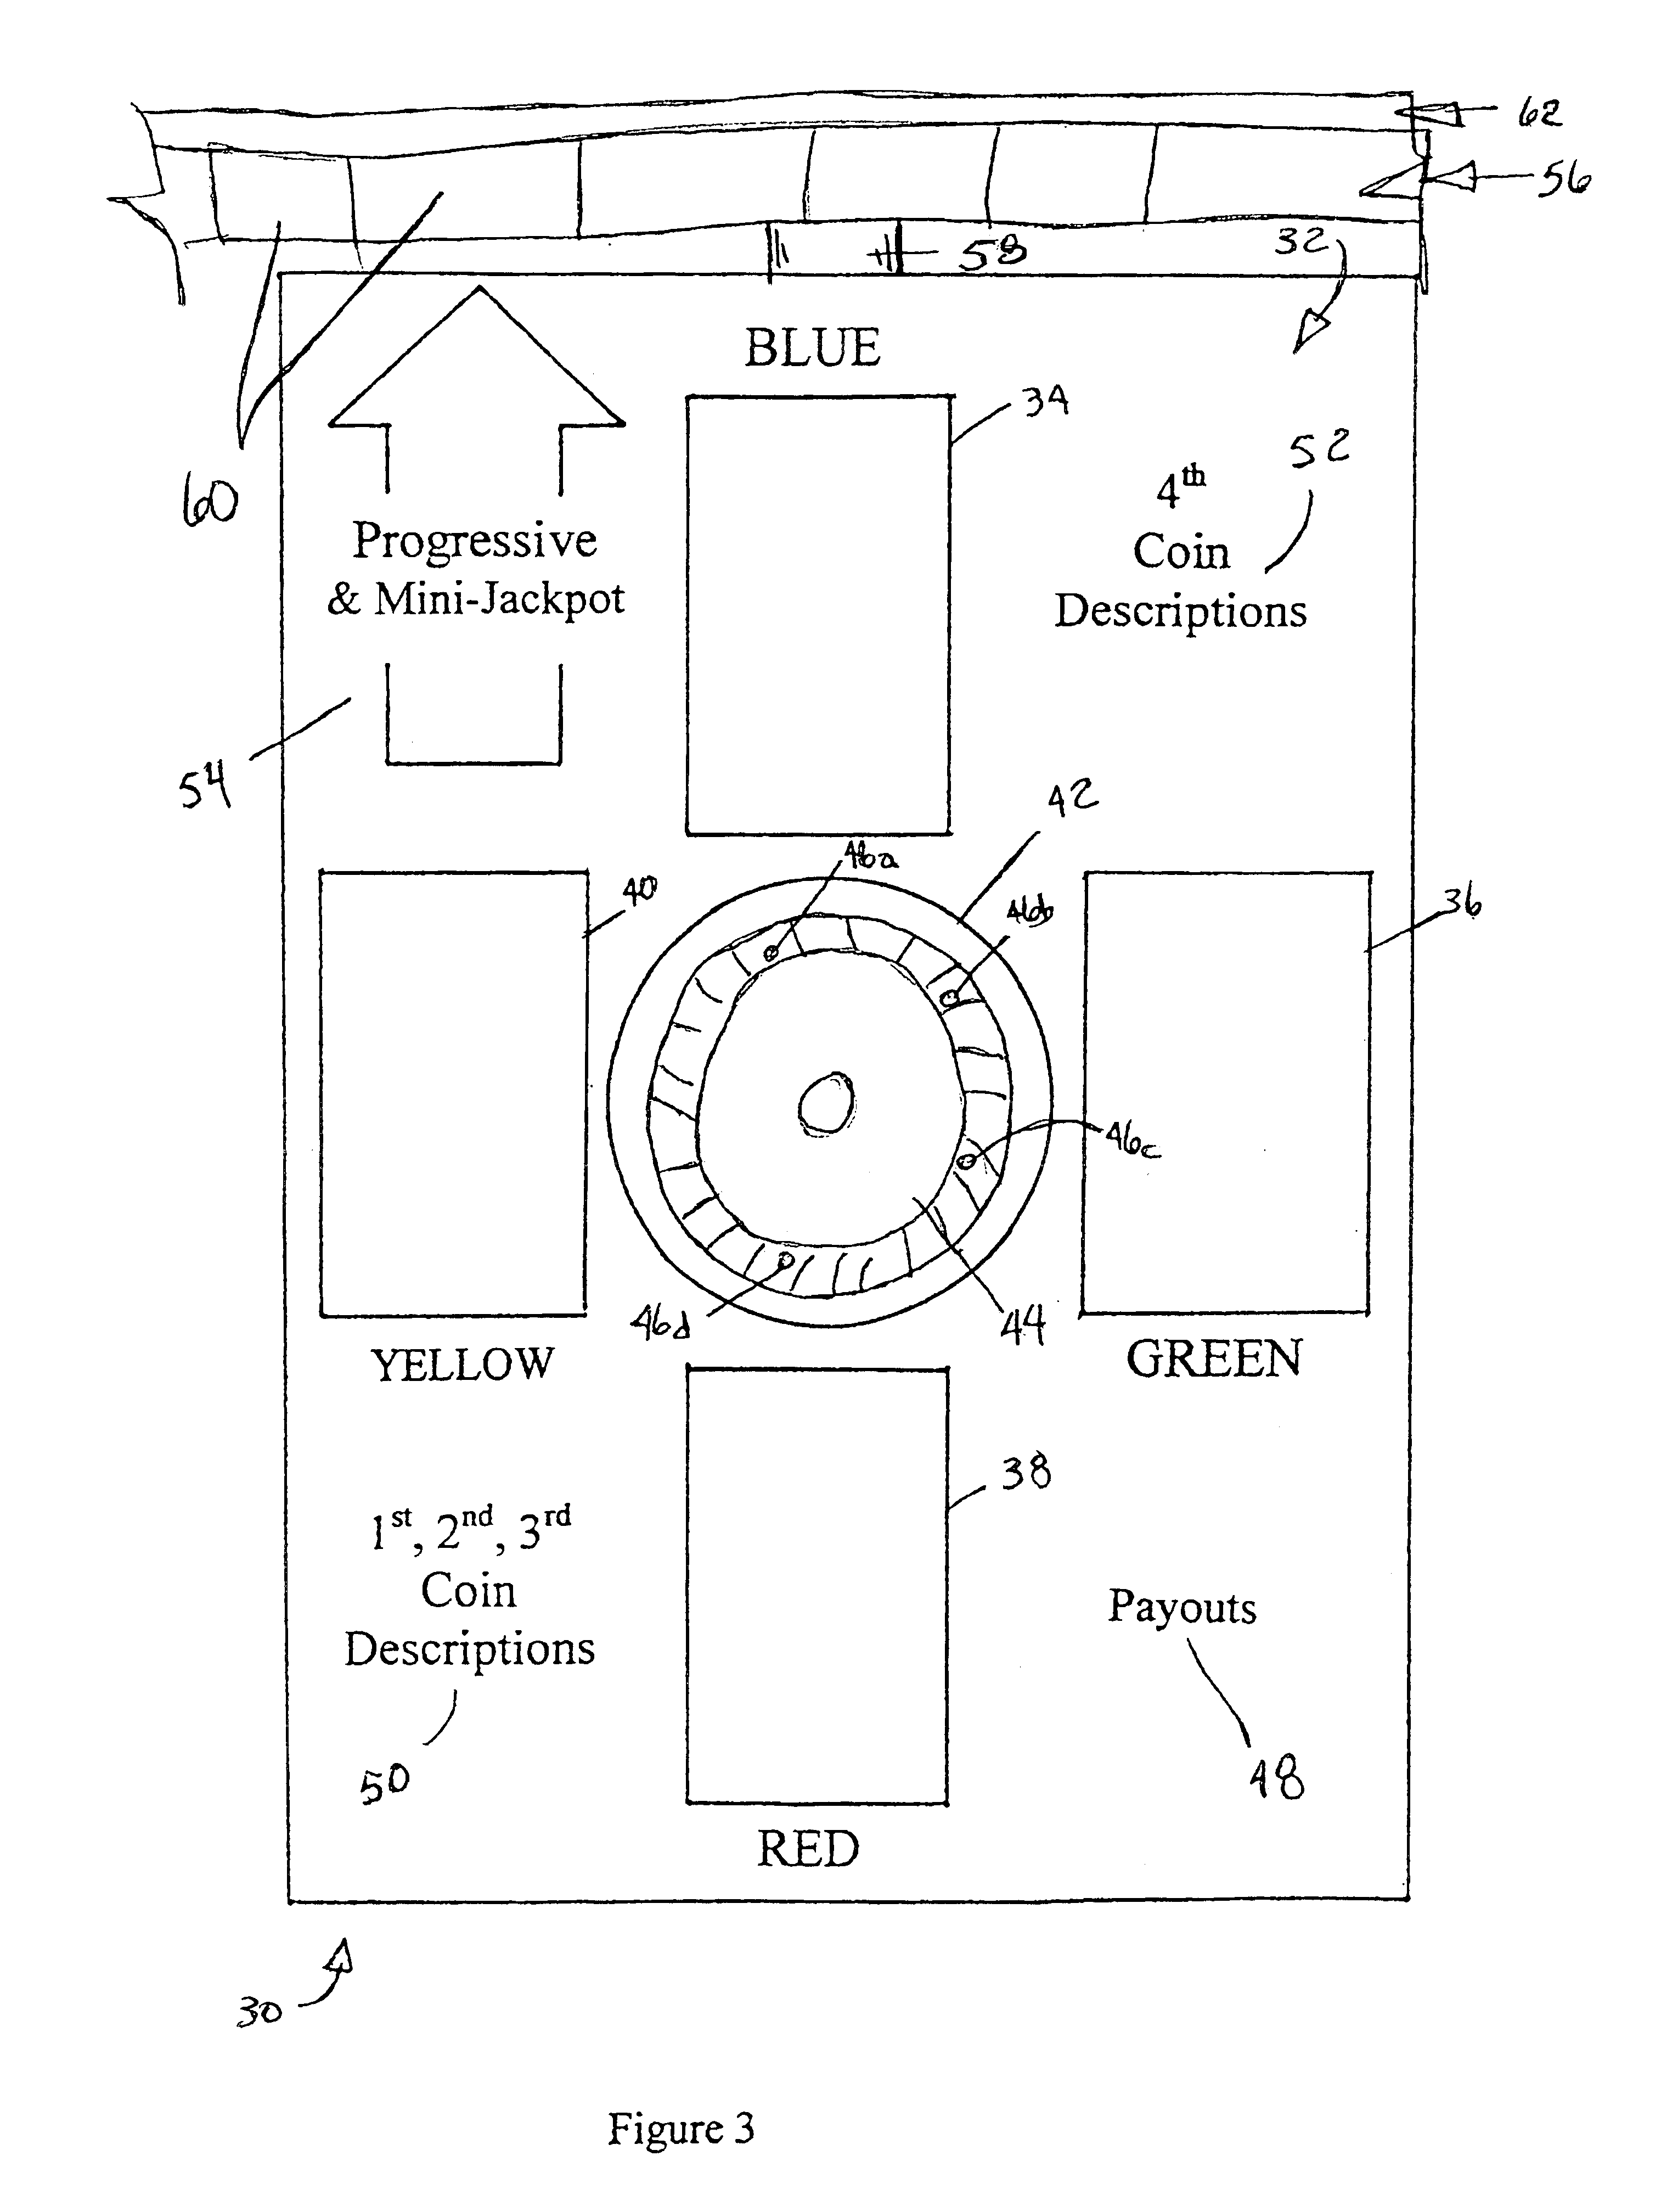 Roulette-type gaming apparatus and method for playing the same